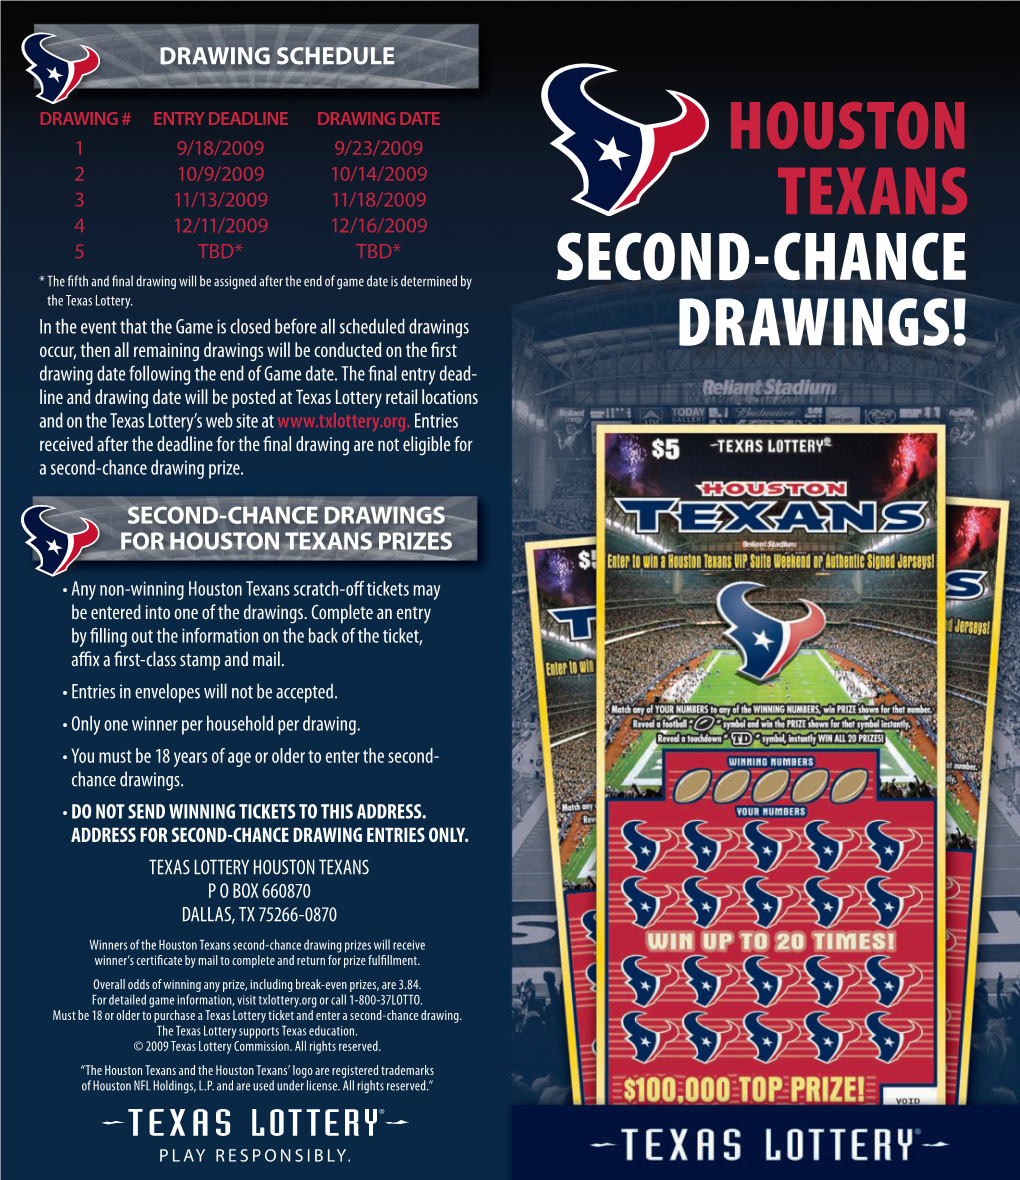 Houston Texans Second-Chance Drawings!